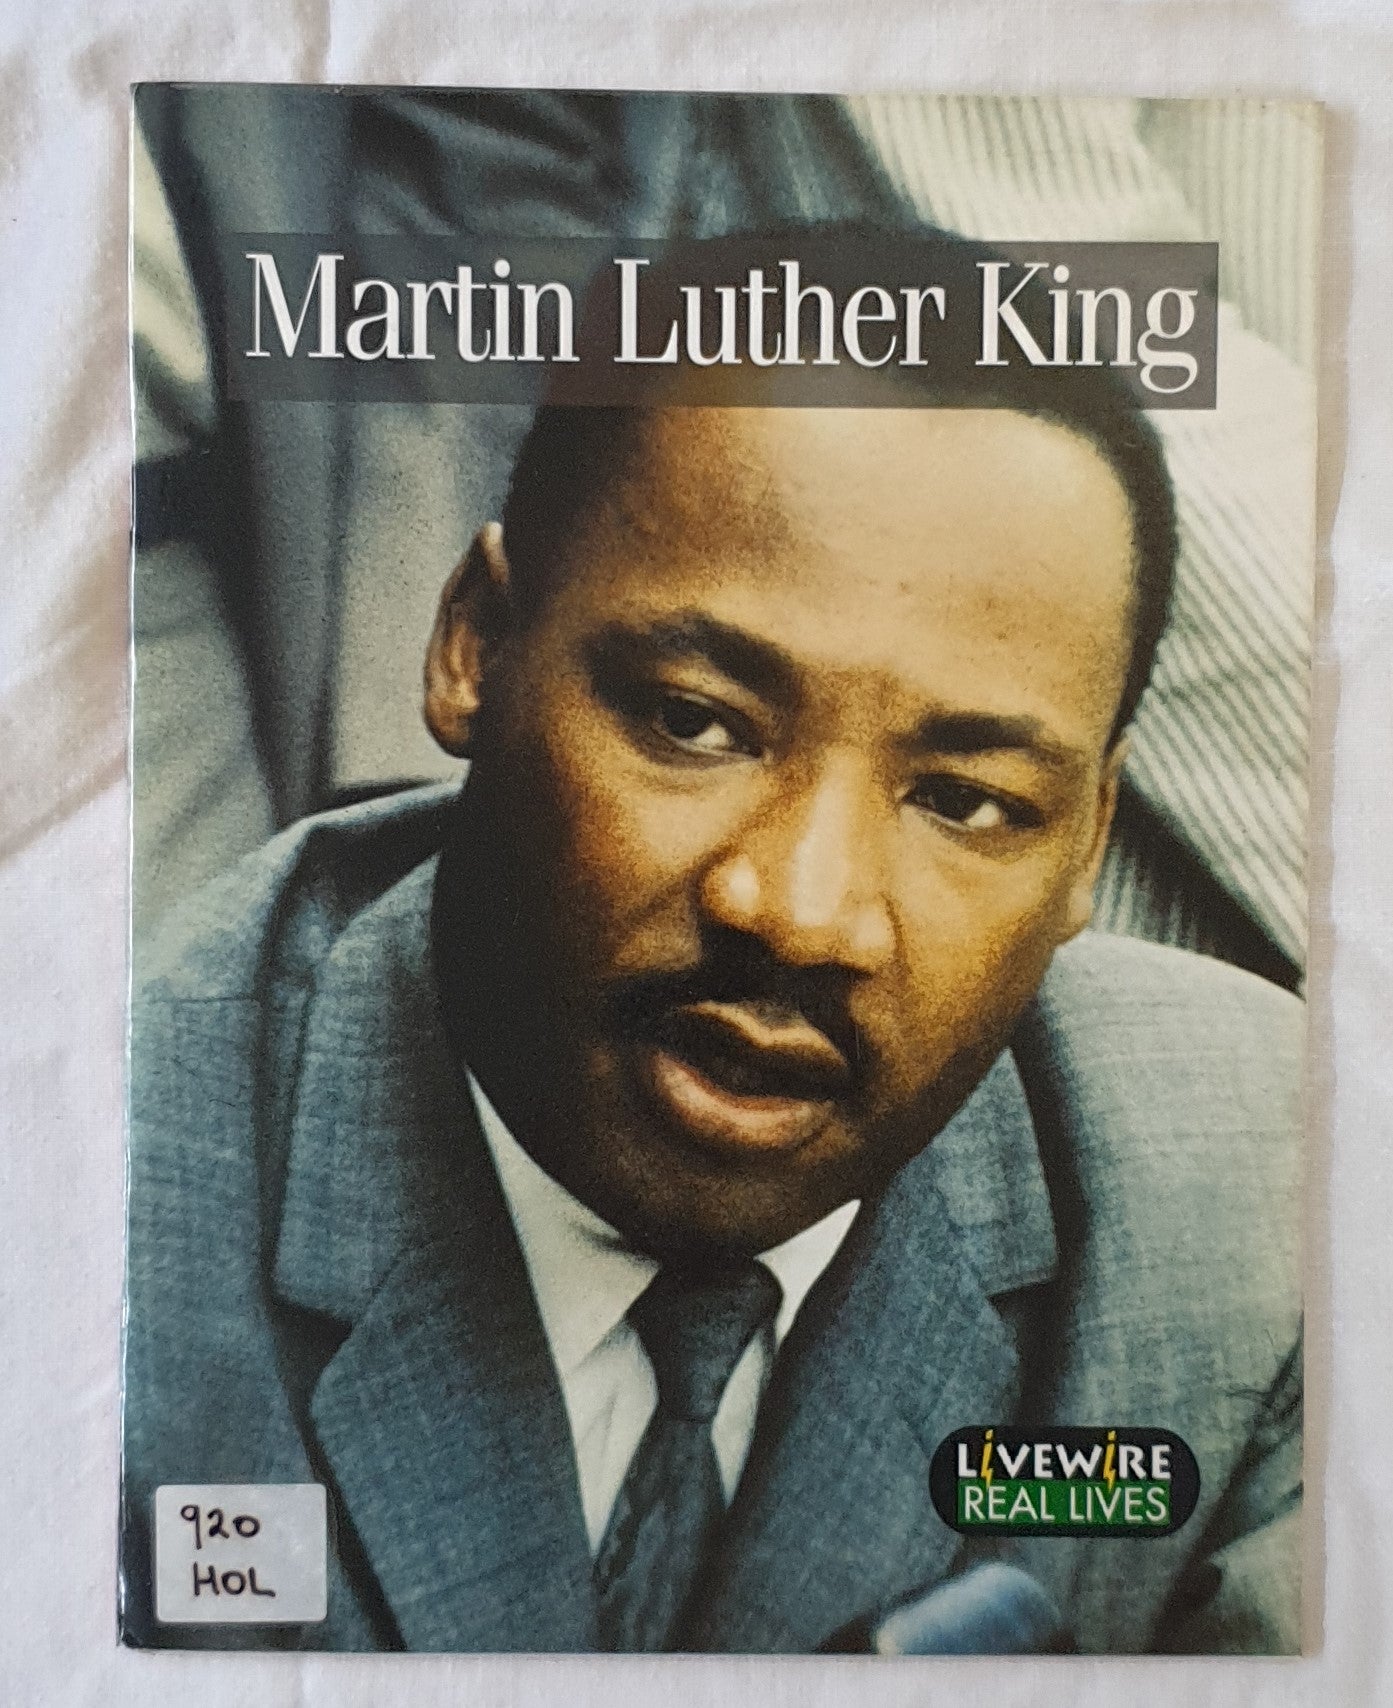 Martin Luther King by Julia Holt